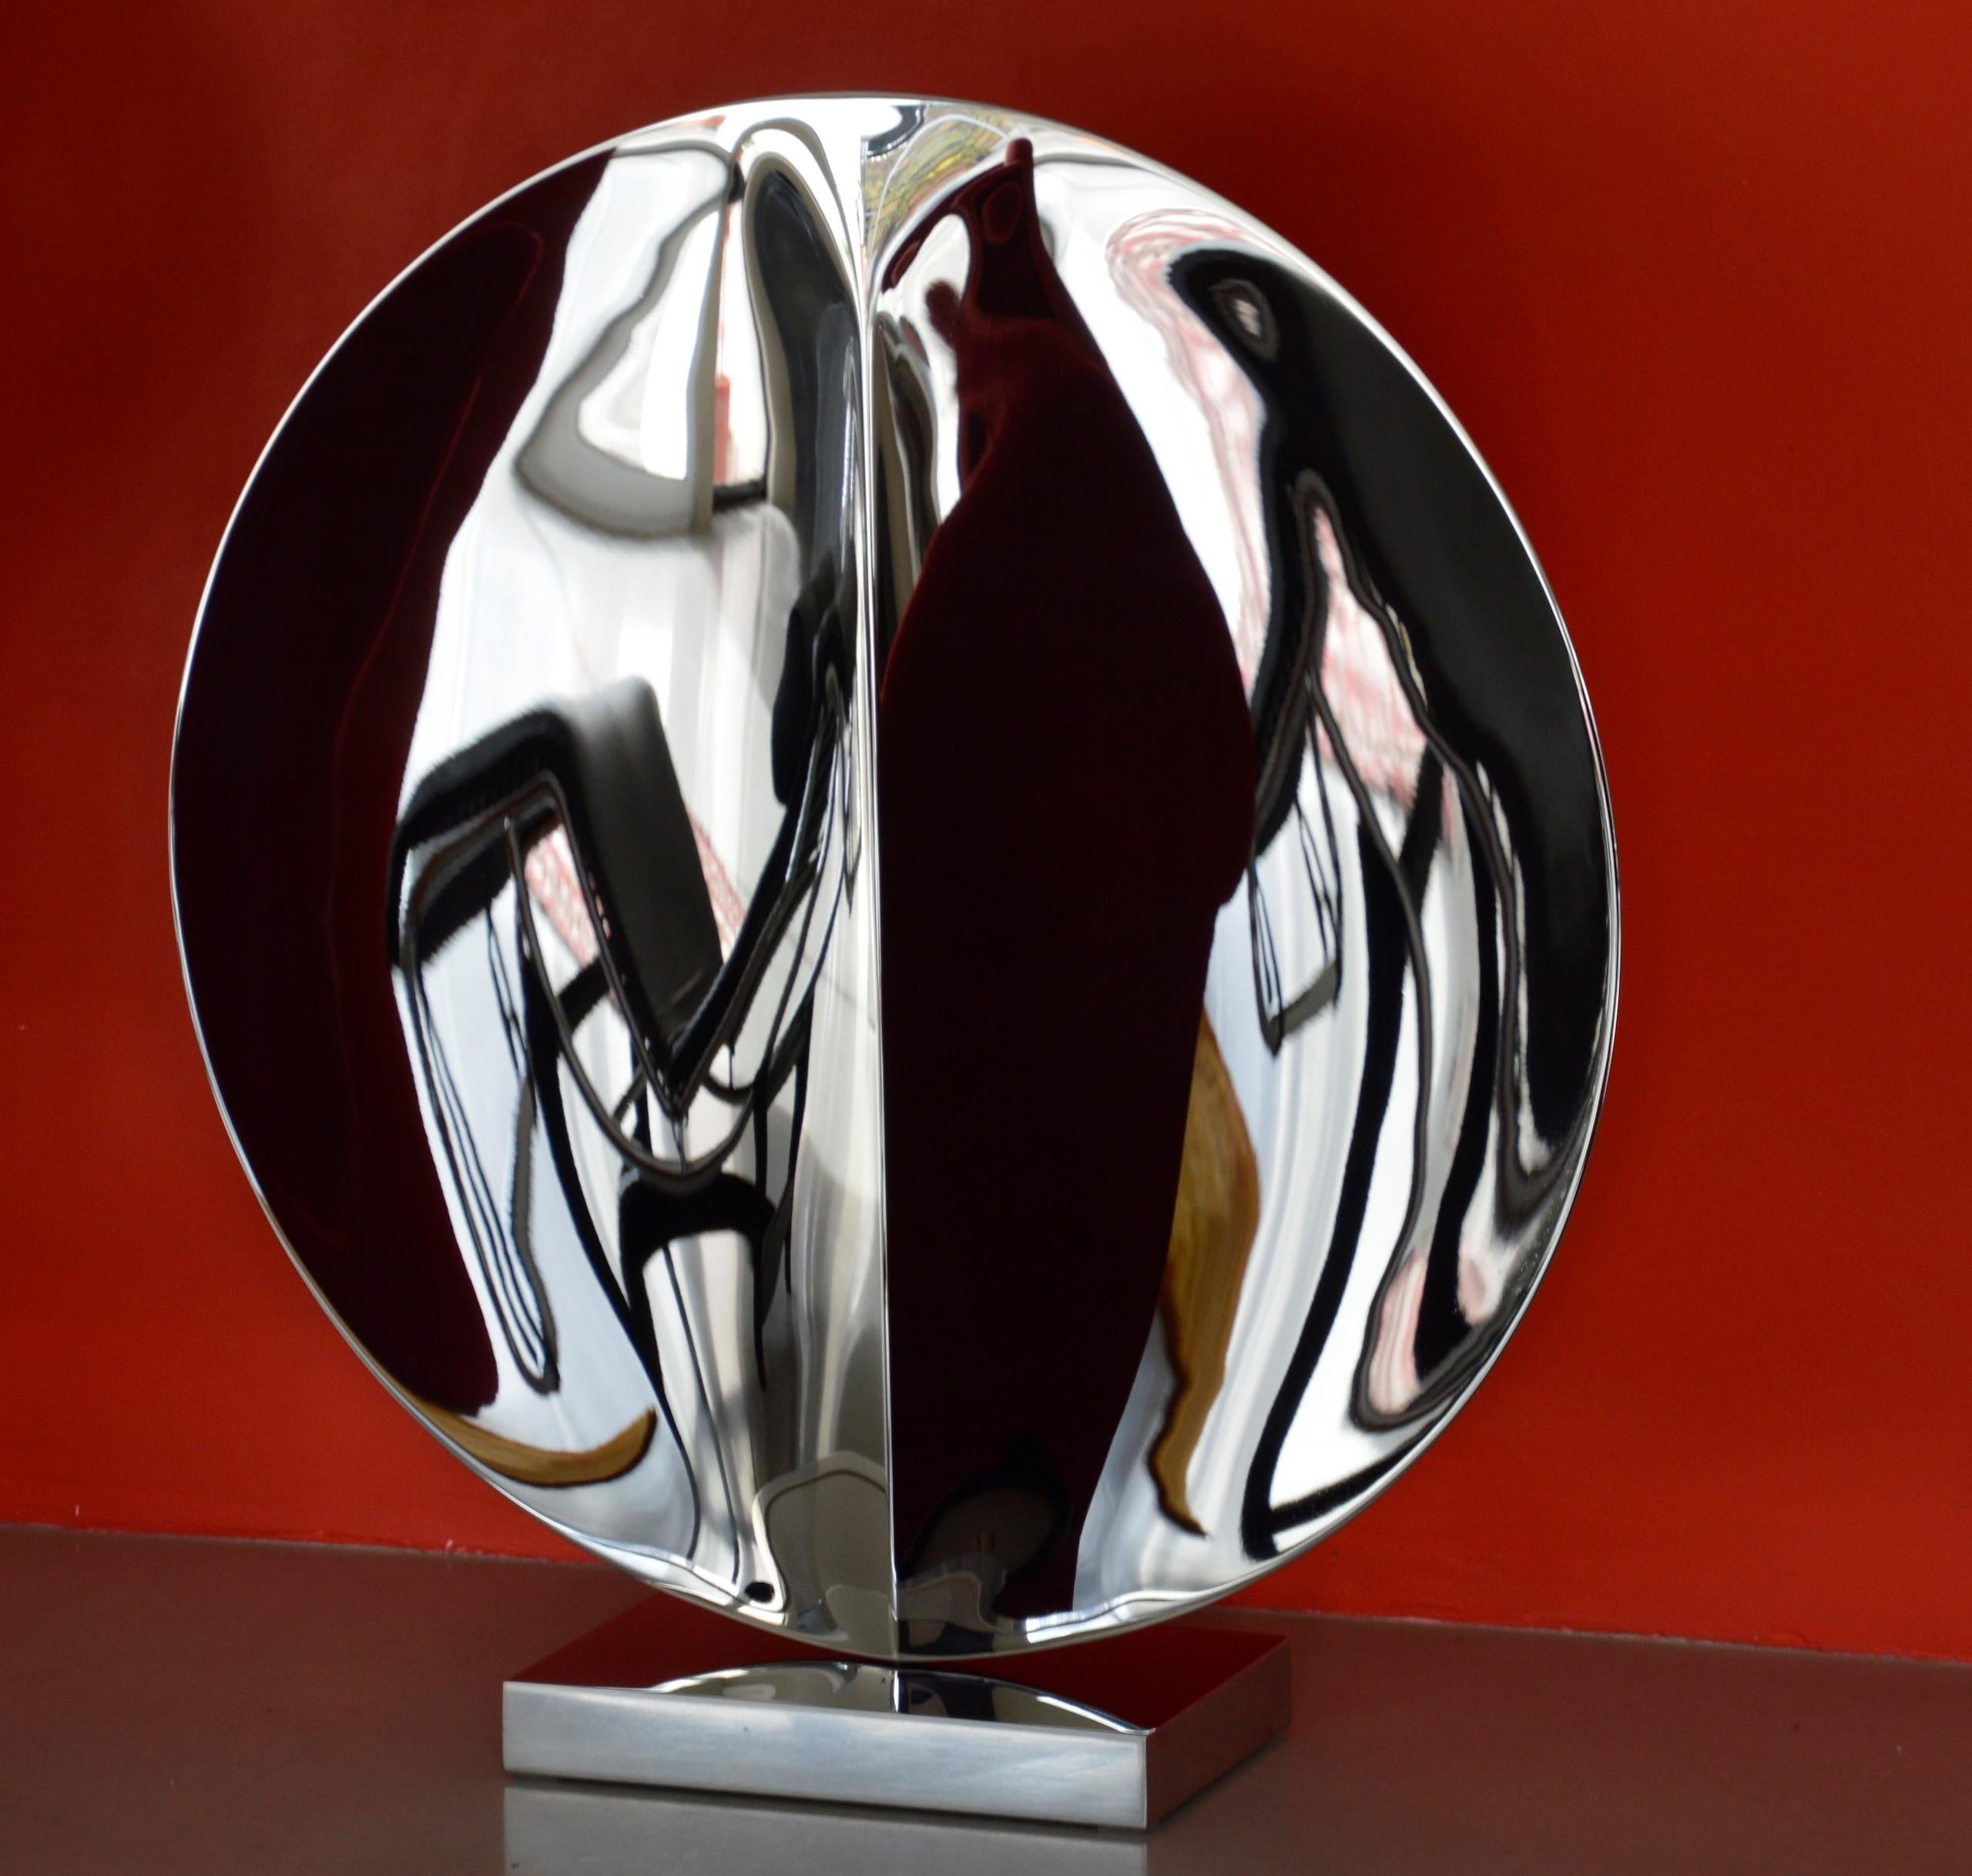 Mirror “with fold” I is a unique mirror-polished stainless steel sculpture and base by contemporary artist Franck K, dimensions are 77 × 73 × 20 cm (30.3 × 28.7 × 7.9 in). 
The sculpture is signed and comes with a certificate of authenticity.

The